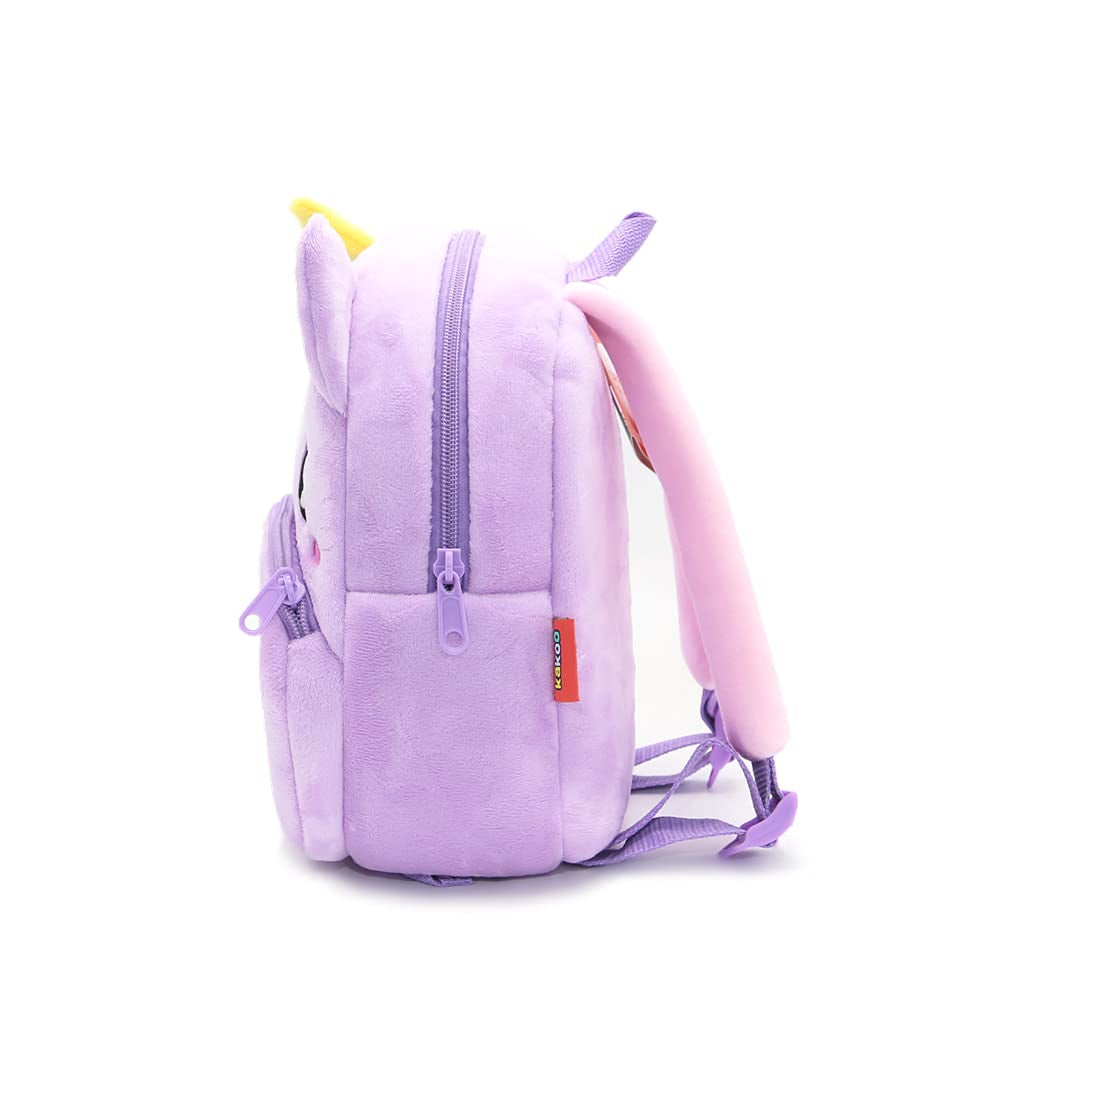 Anykidz 3D Purple Unicorn Kids School Backpack Cute Cartoon Animal Style Children Toddler Plush Bag Perfect Accessories For Boys and Girls-Backpacks-PEROZ Accessories